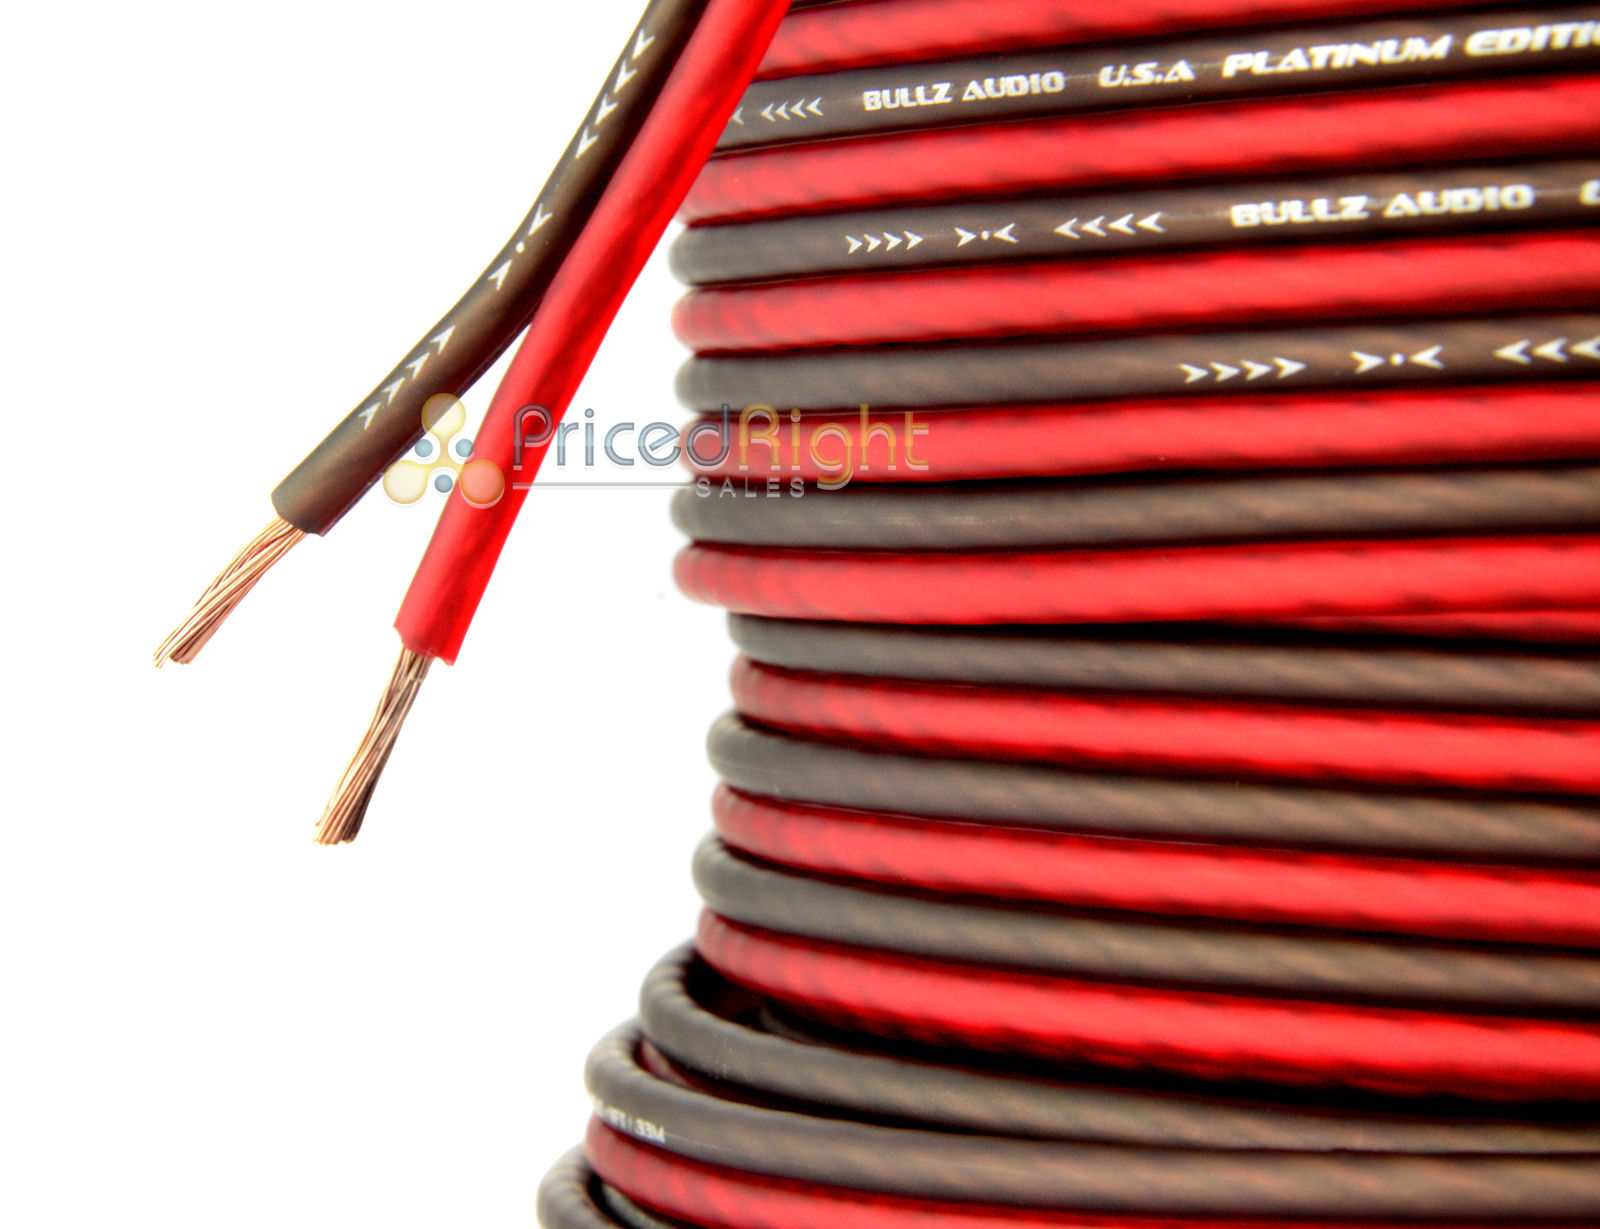 5 Ft 14 Gauge Professional Gauge Speaker Wire Zip Cable Car Home Audio AWG